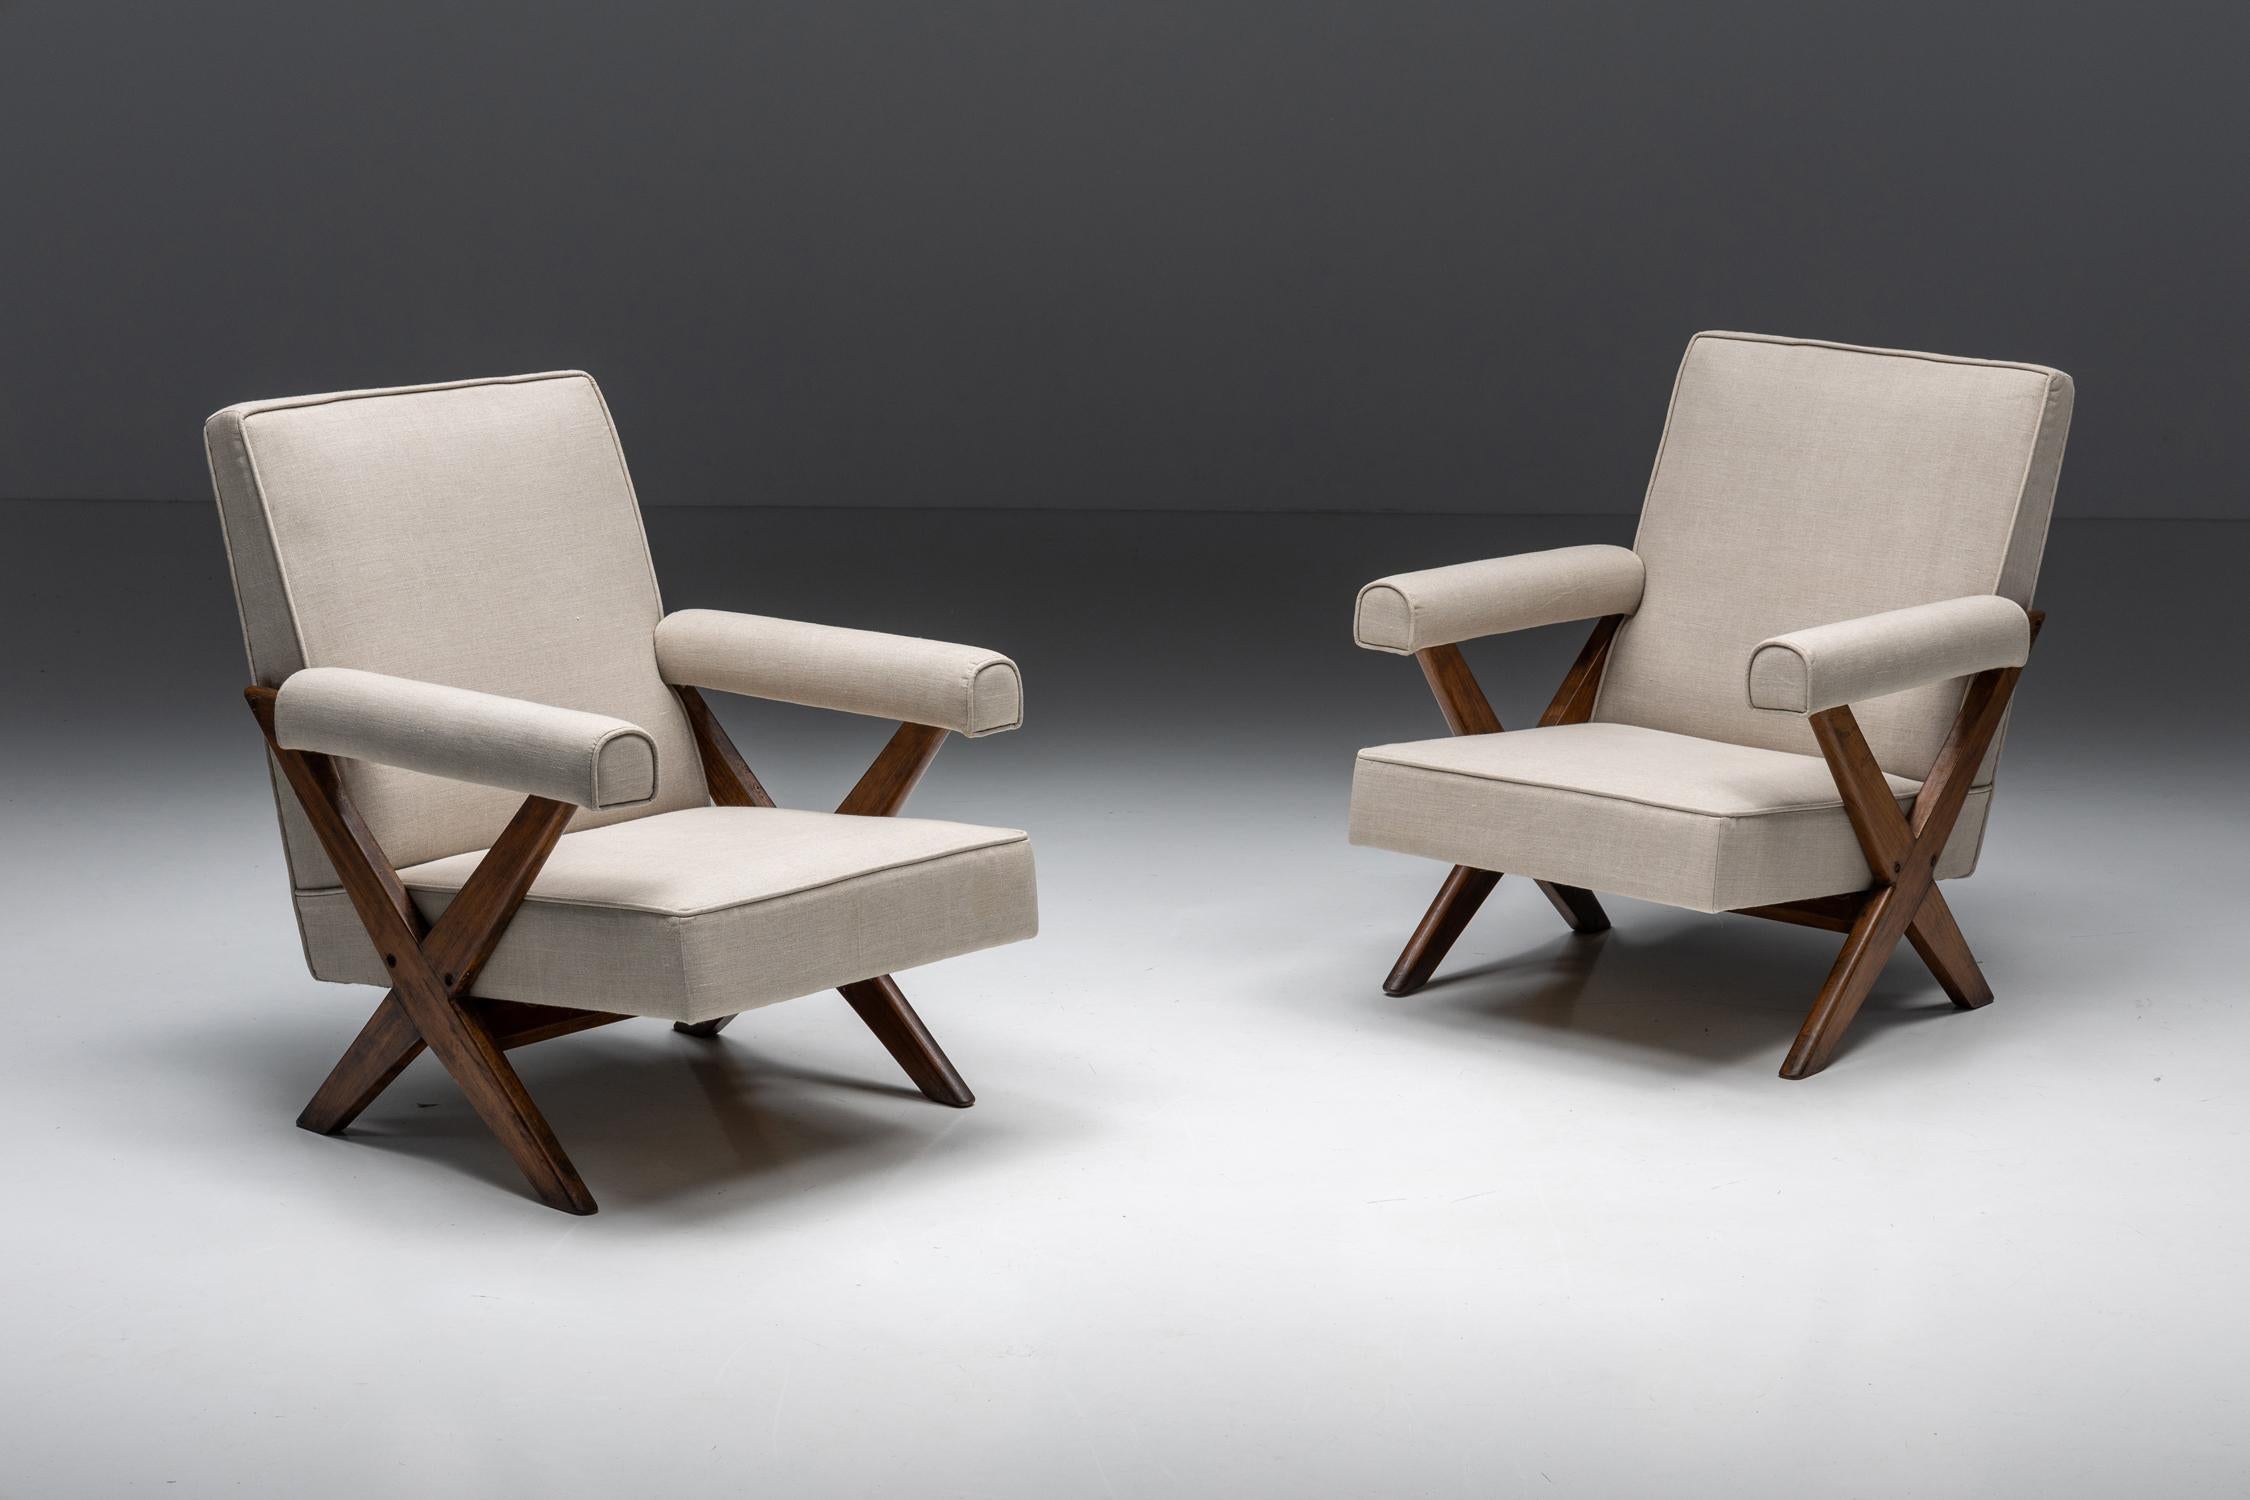 Lounge Chairs PJ-SI-48-A by Pierre Jeanneret, Solid Teak, Chandigarh, 1960s

Comfortable upholstered lounge chairs by Pierre Jeanneret were created for the city of Chandigarh in India, the utopian city created by his cousin Le Corbusier. These